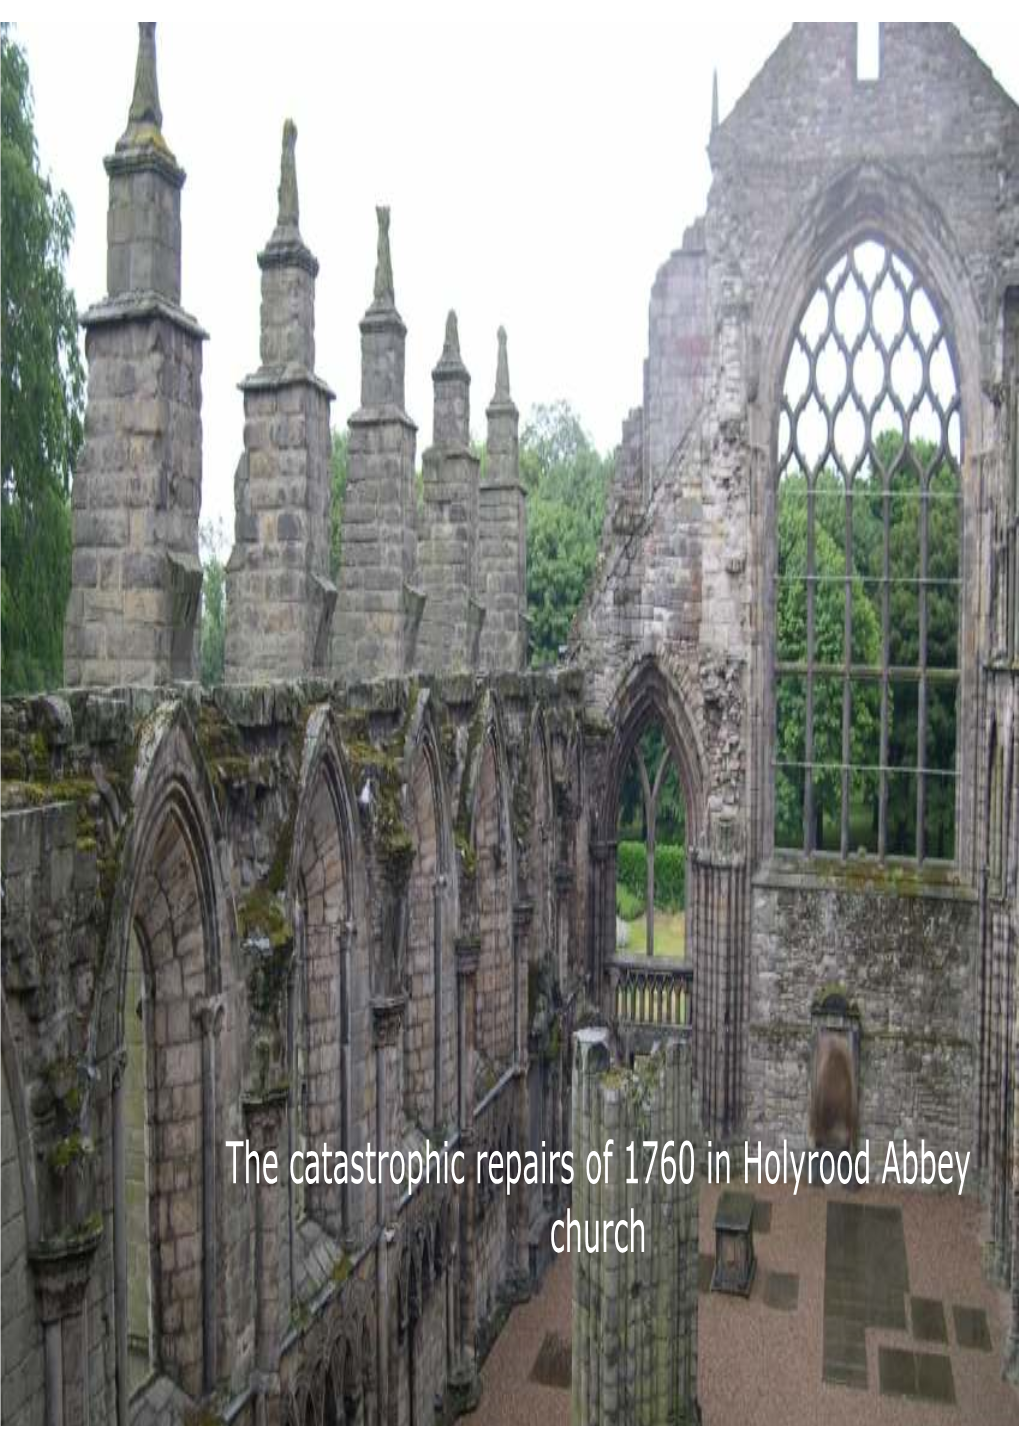 The Catastrophic Repairs of 1760 in Holyrood Abbey Church Or “Extreme Avarice Or Stupidity of an Architect”?